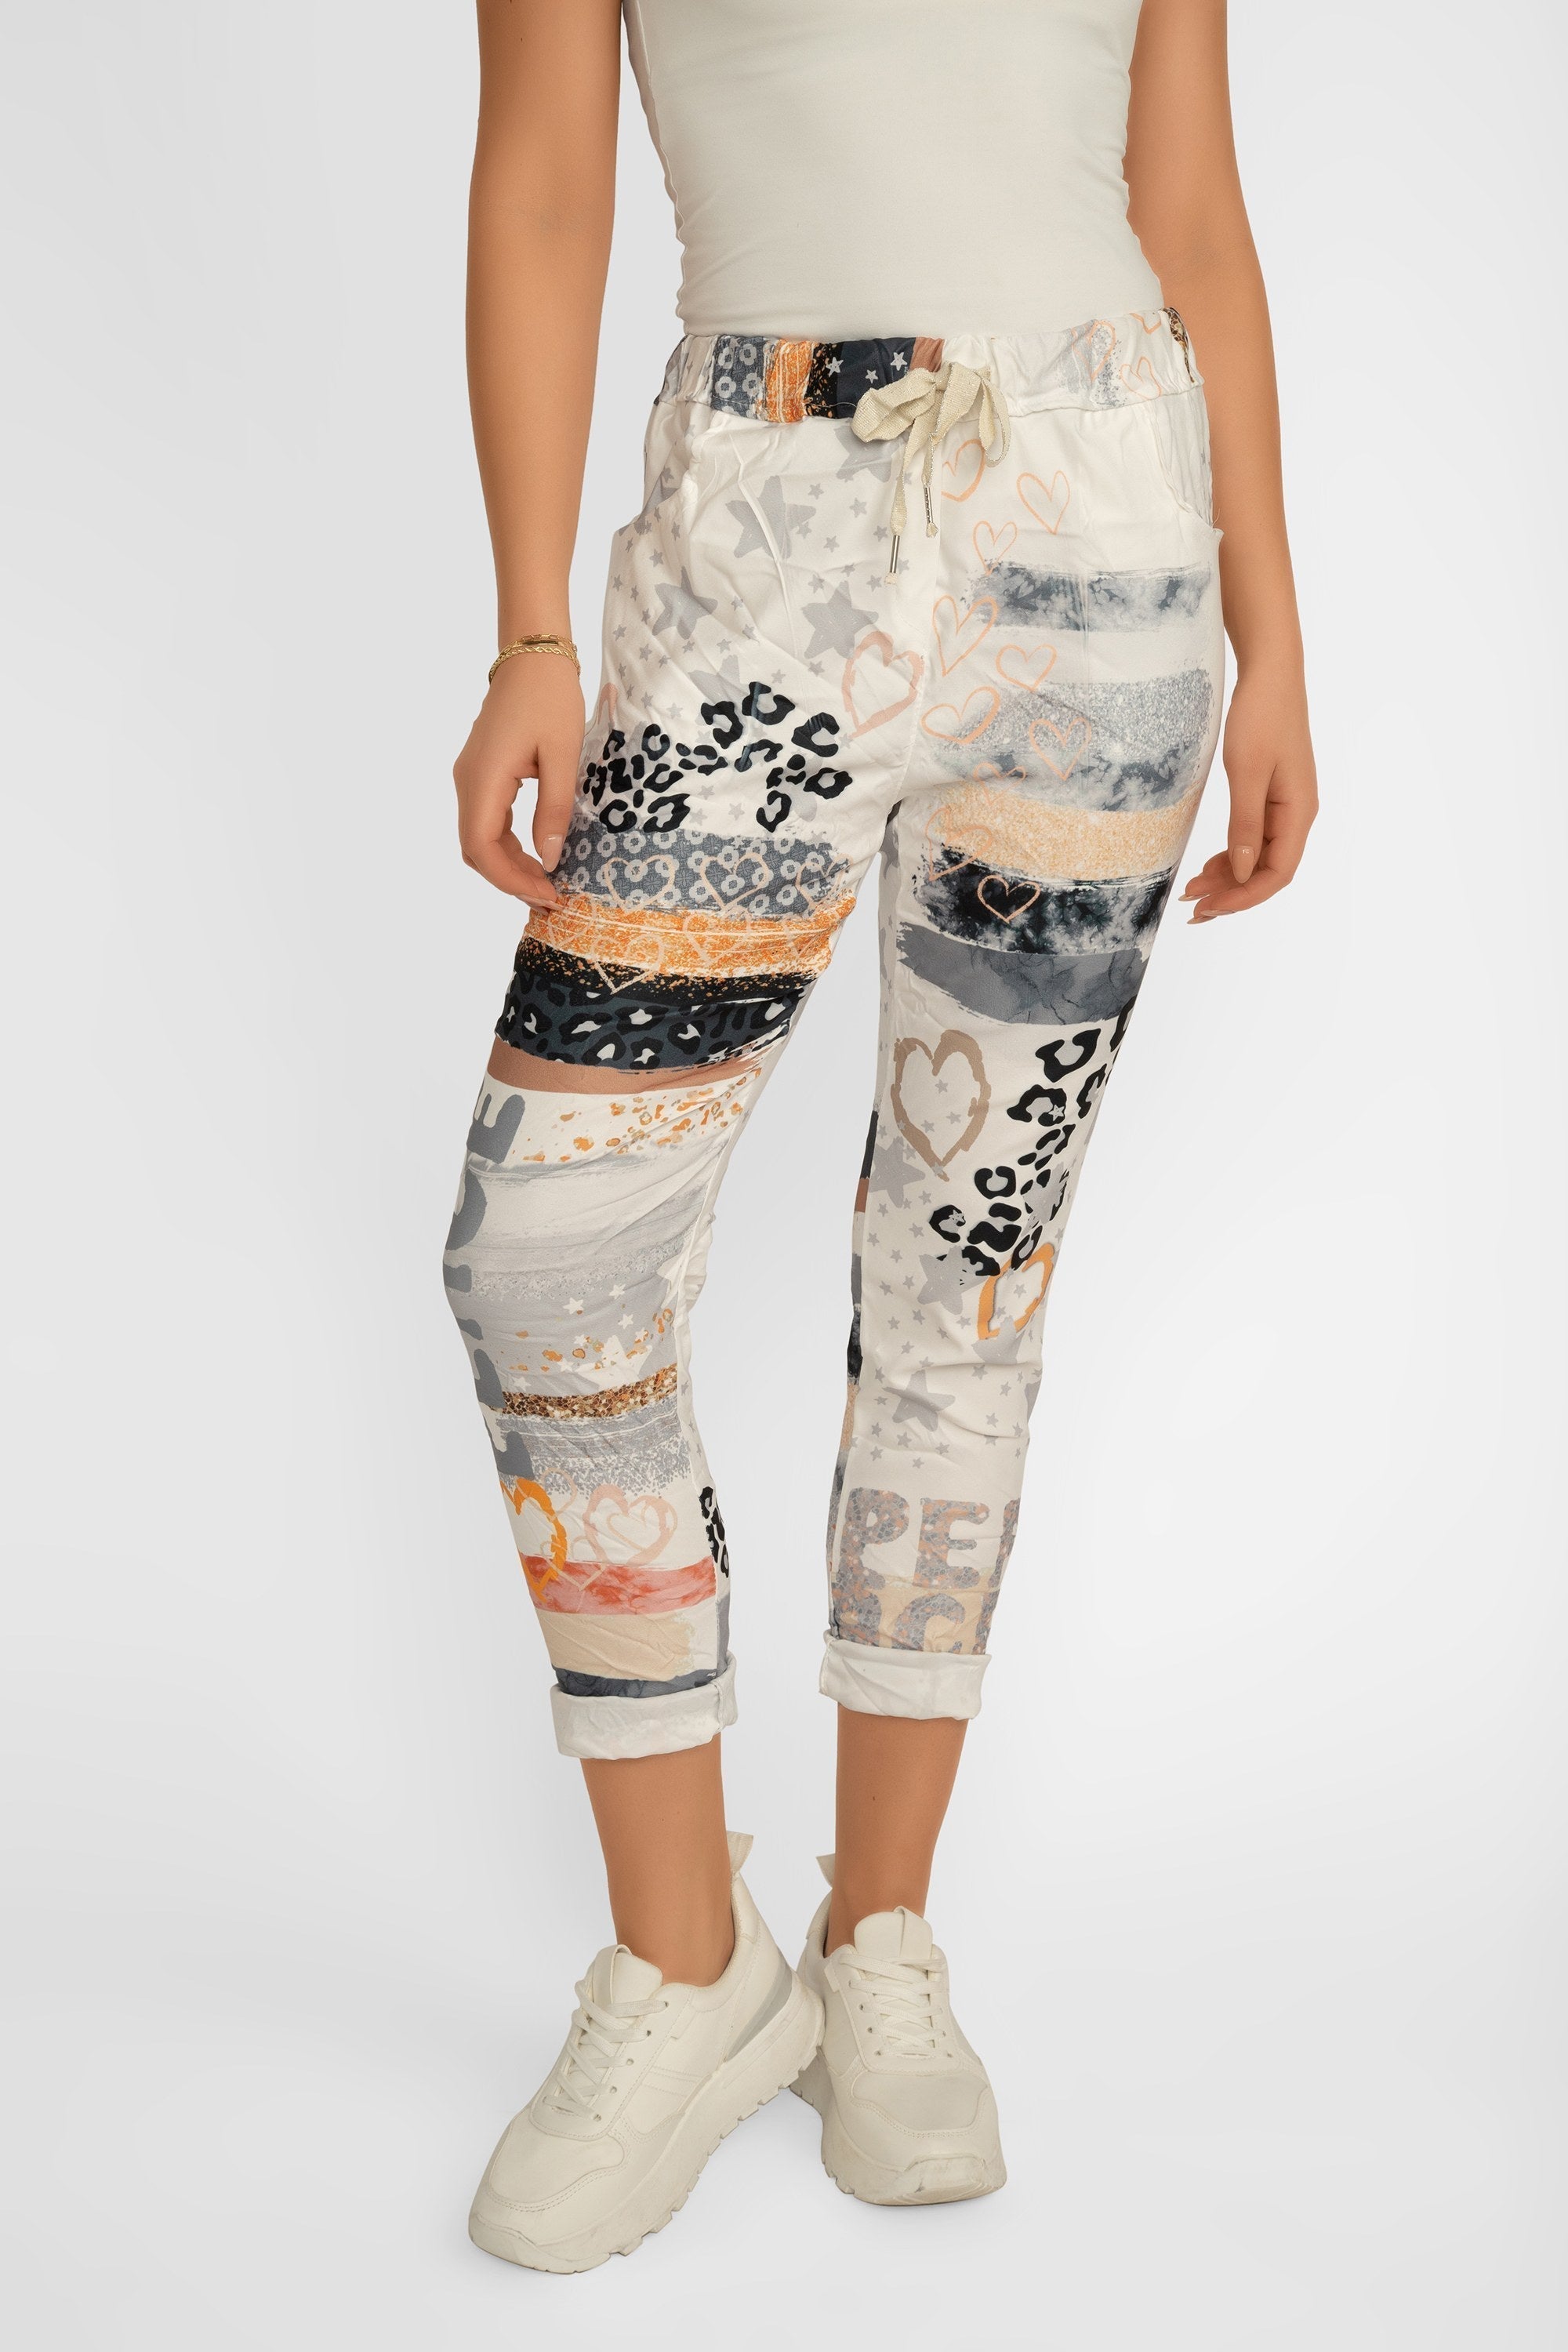 Bella Amore Women's Cropped Multi Print Pull-On Pants in a grey and multicoloured patchwork print